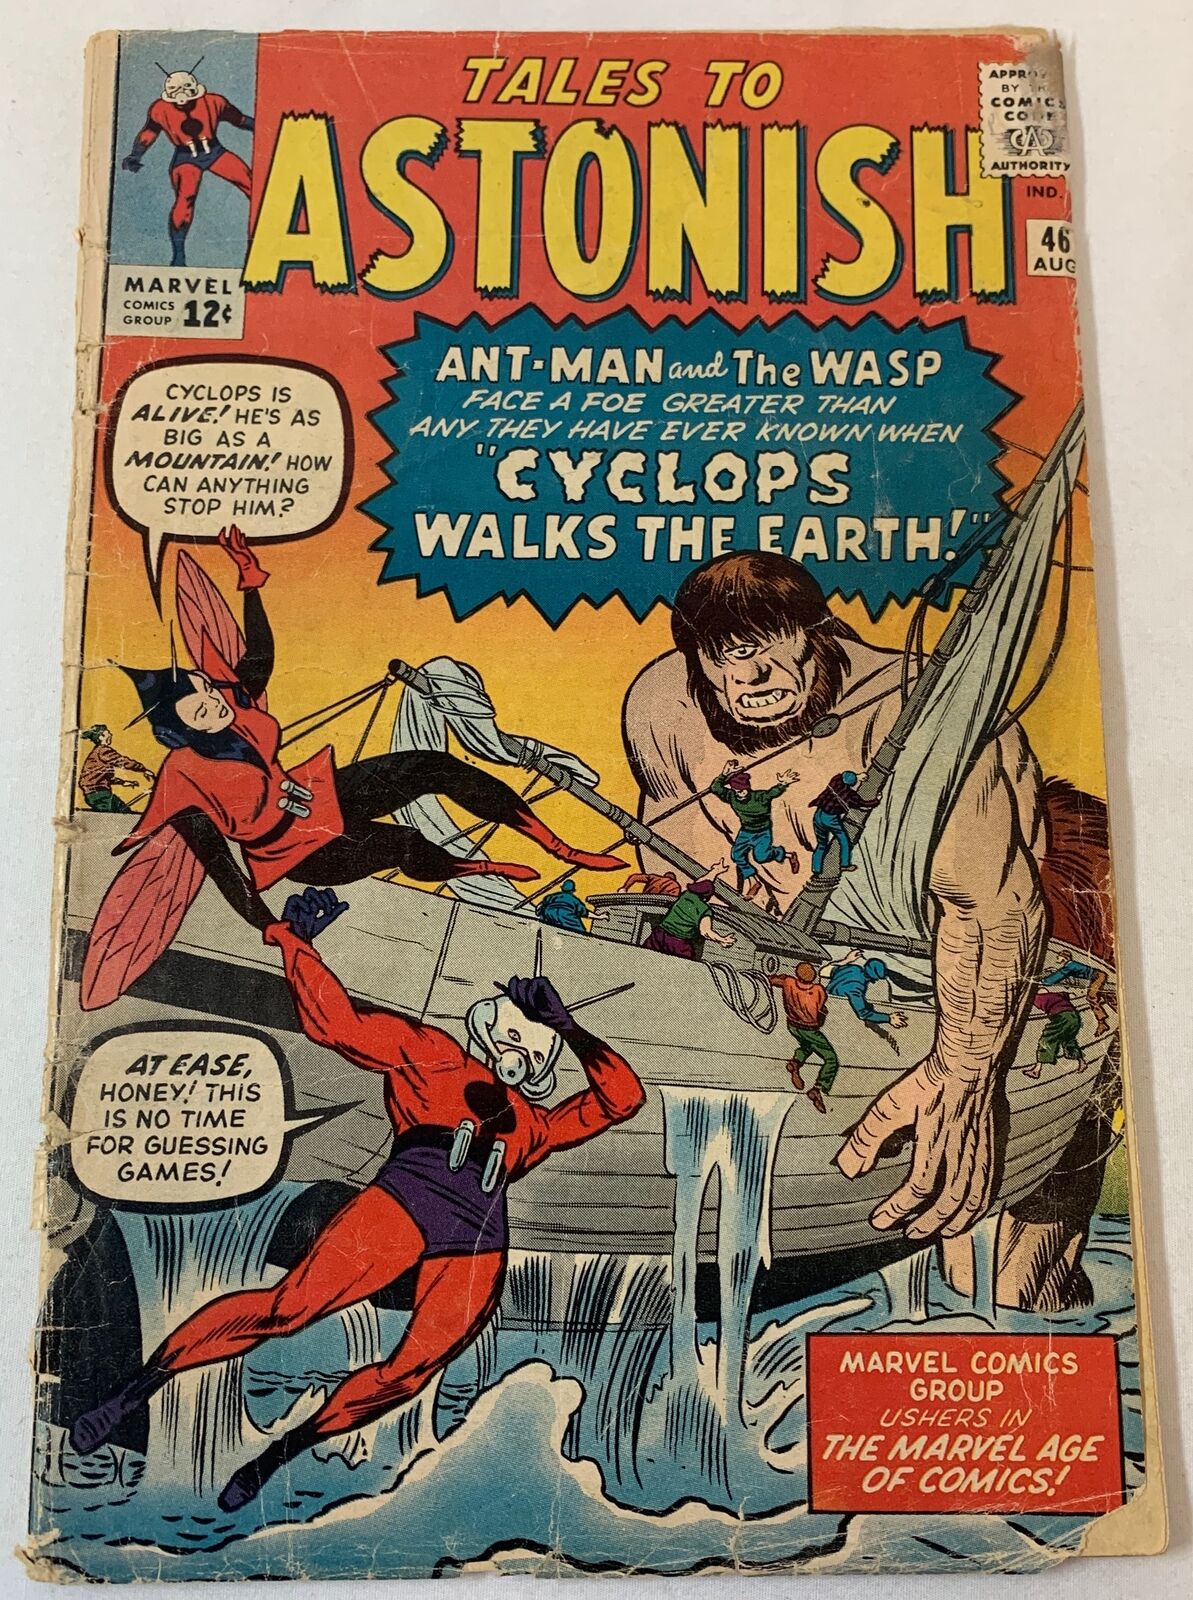 1963 Marvel TALES TO ASTONISH #46 ~ cover detached ~ Ant-Man, 3rd Wasp